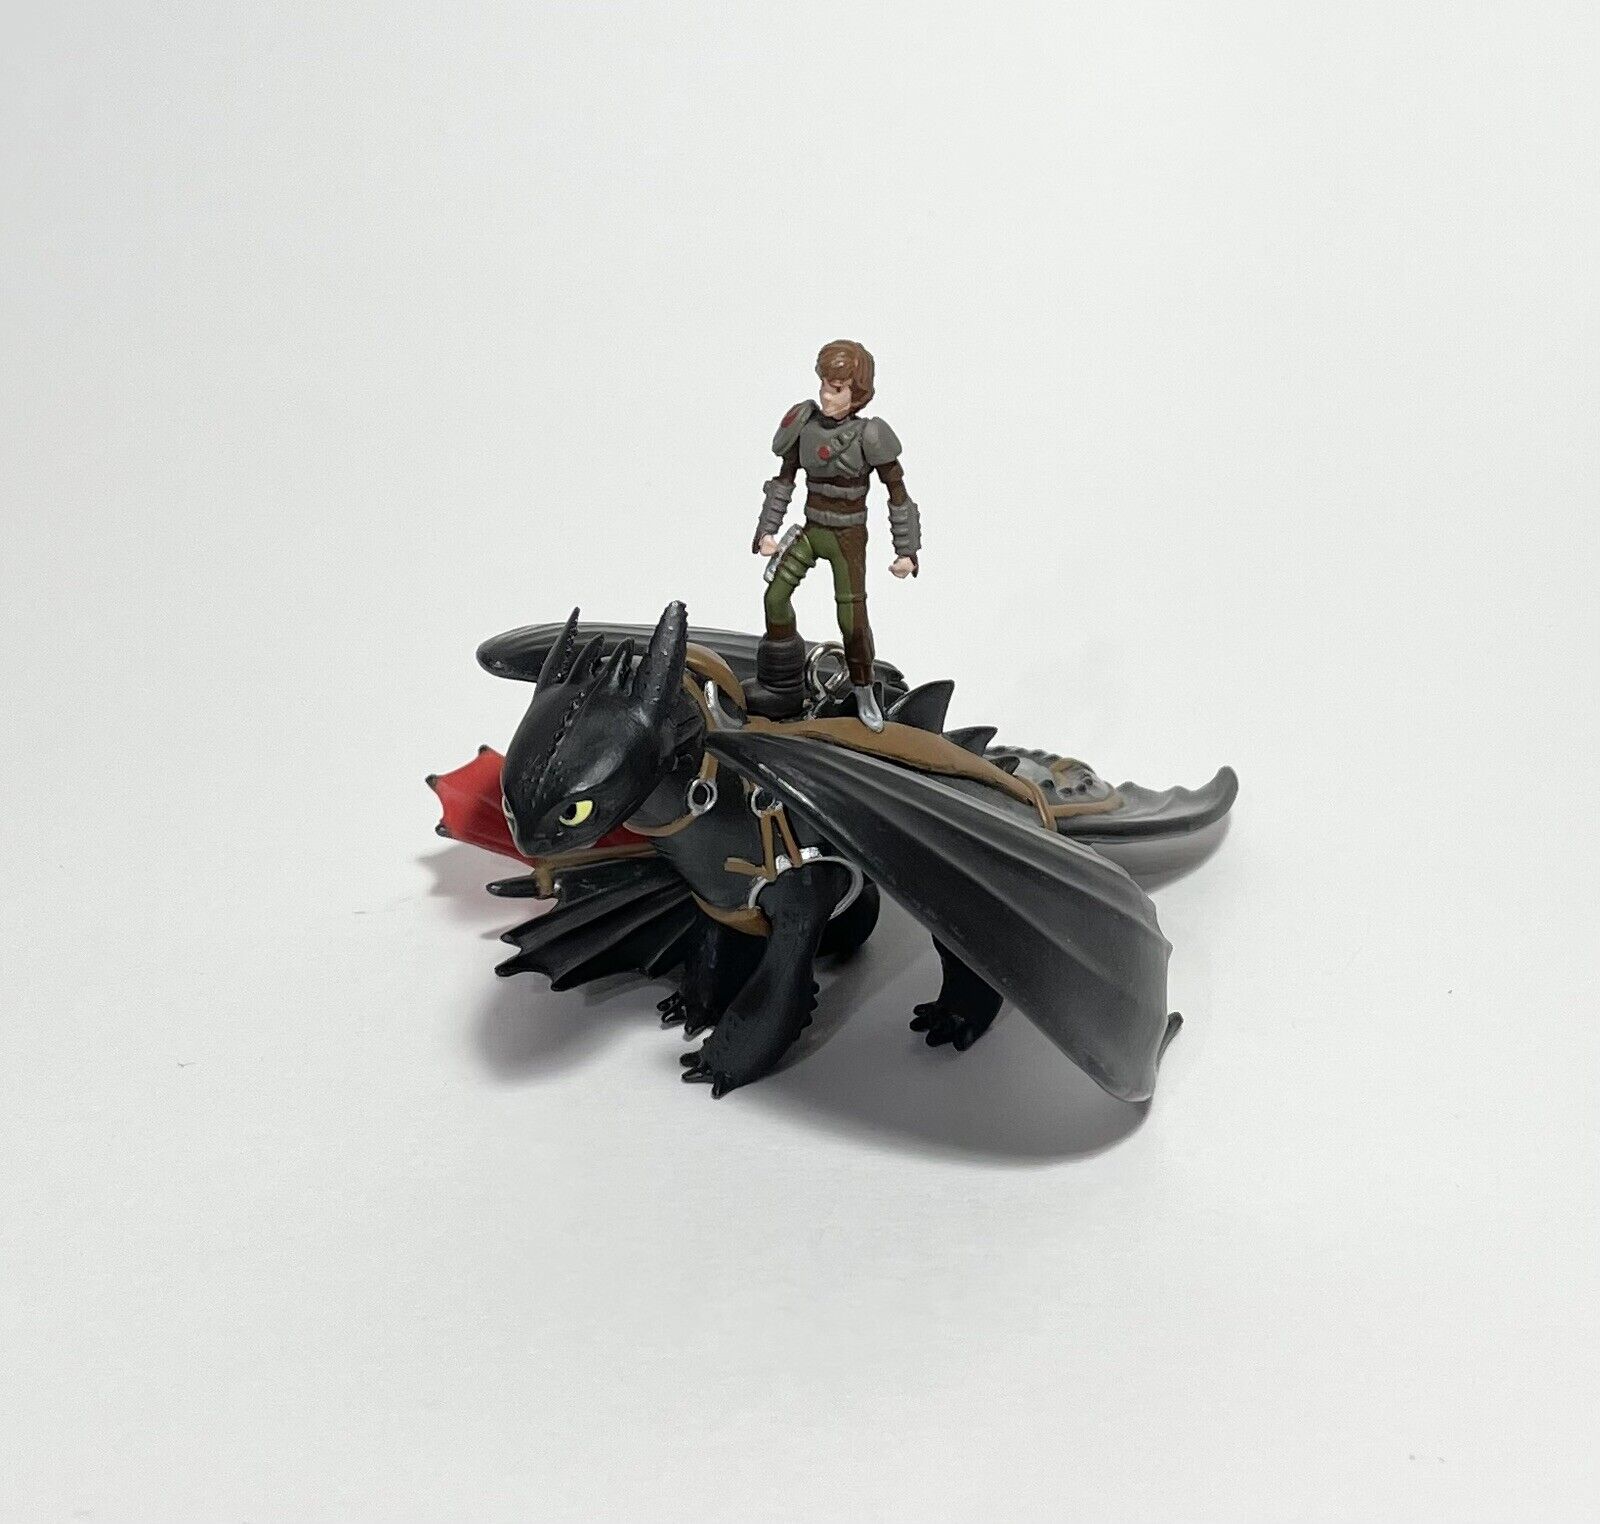 2014 Hallmark Ornament Hiccup And Toothless How To Train Your Dragon 2, No Box